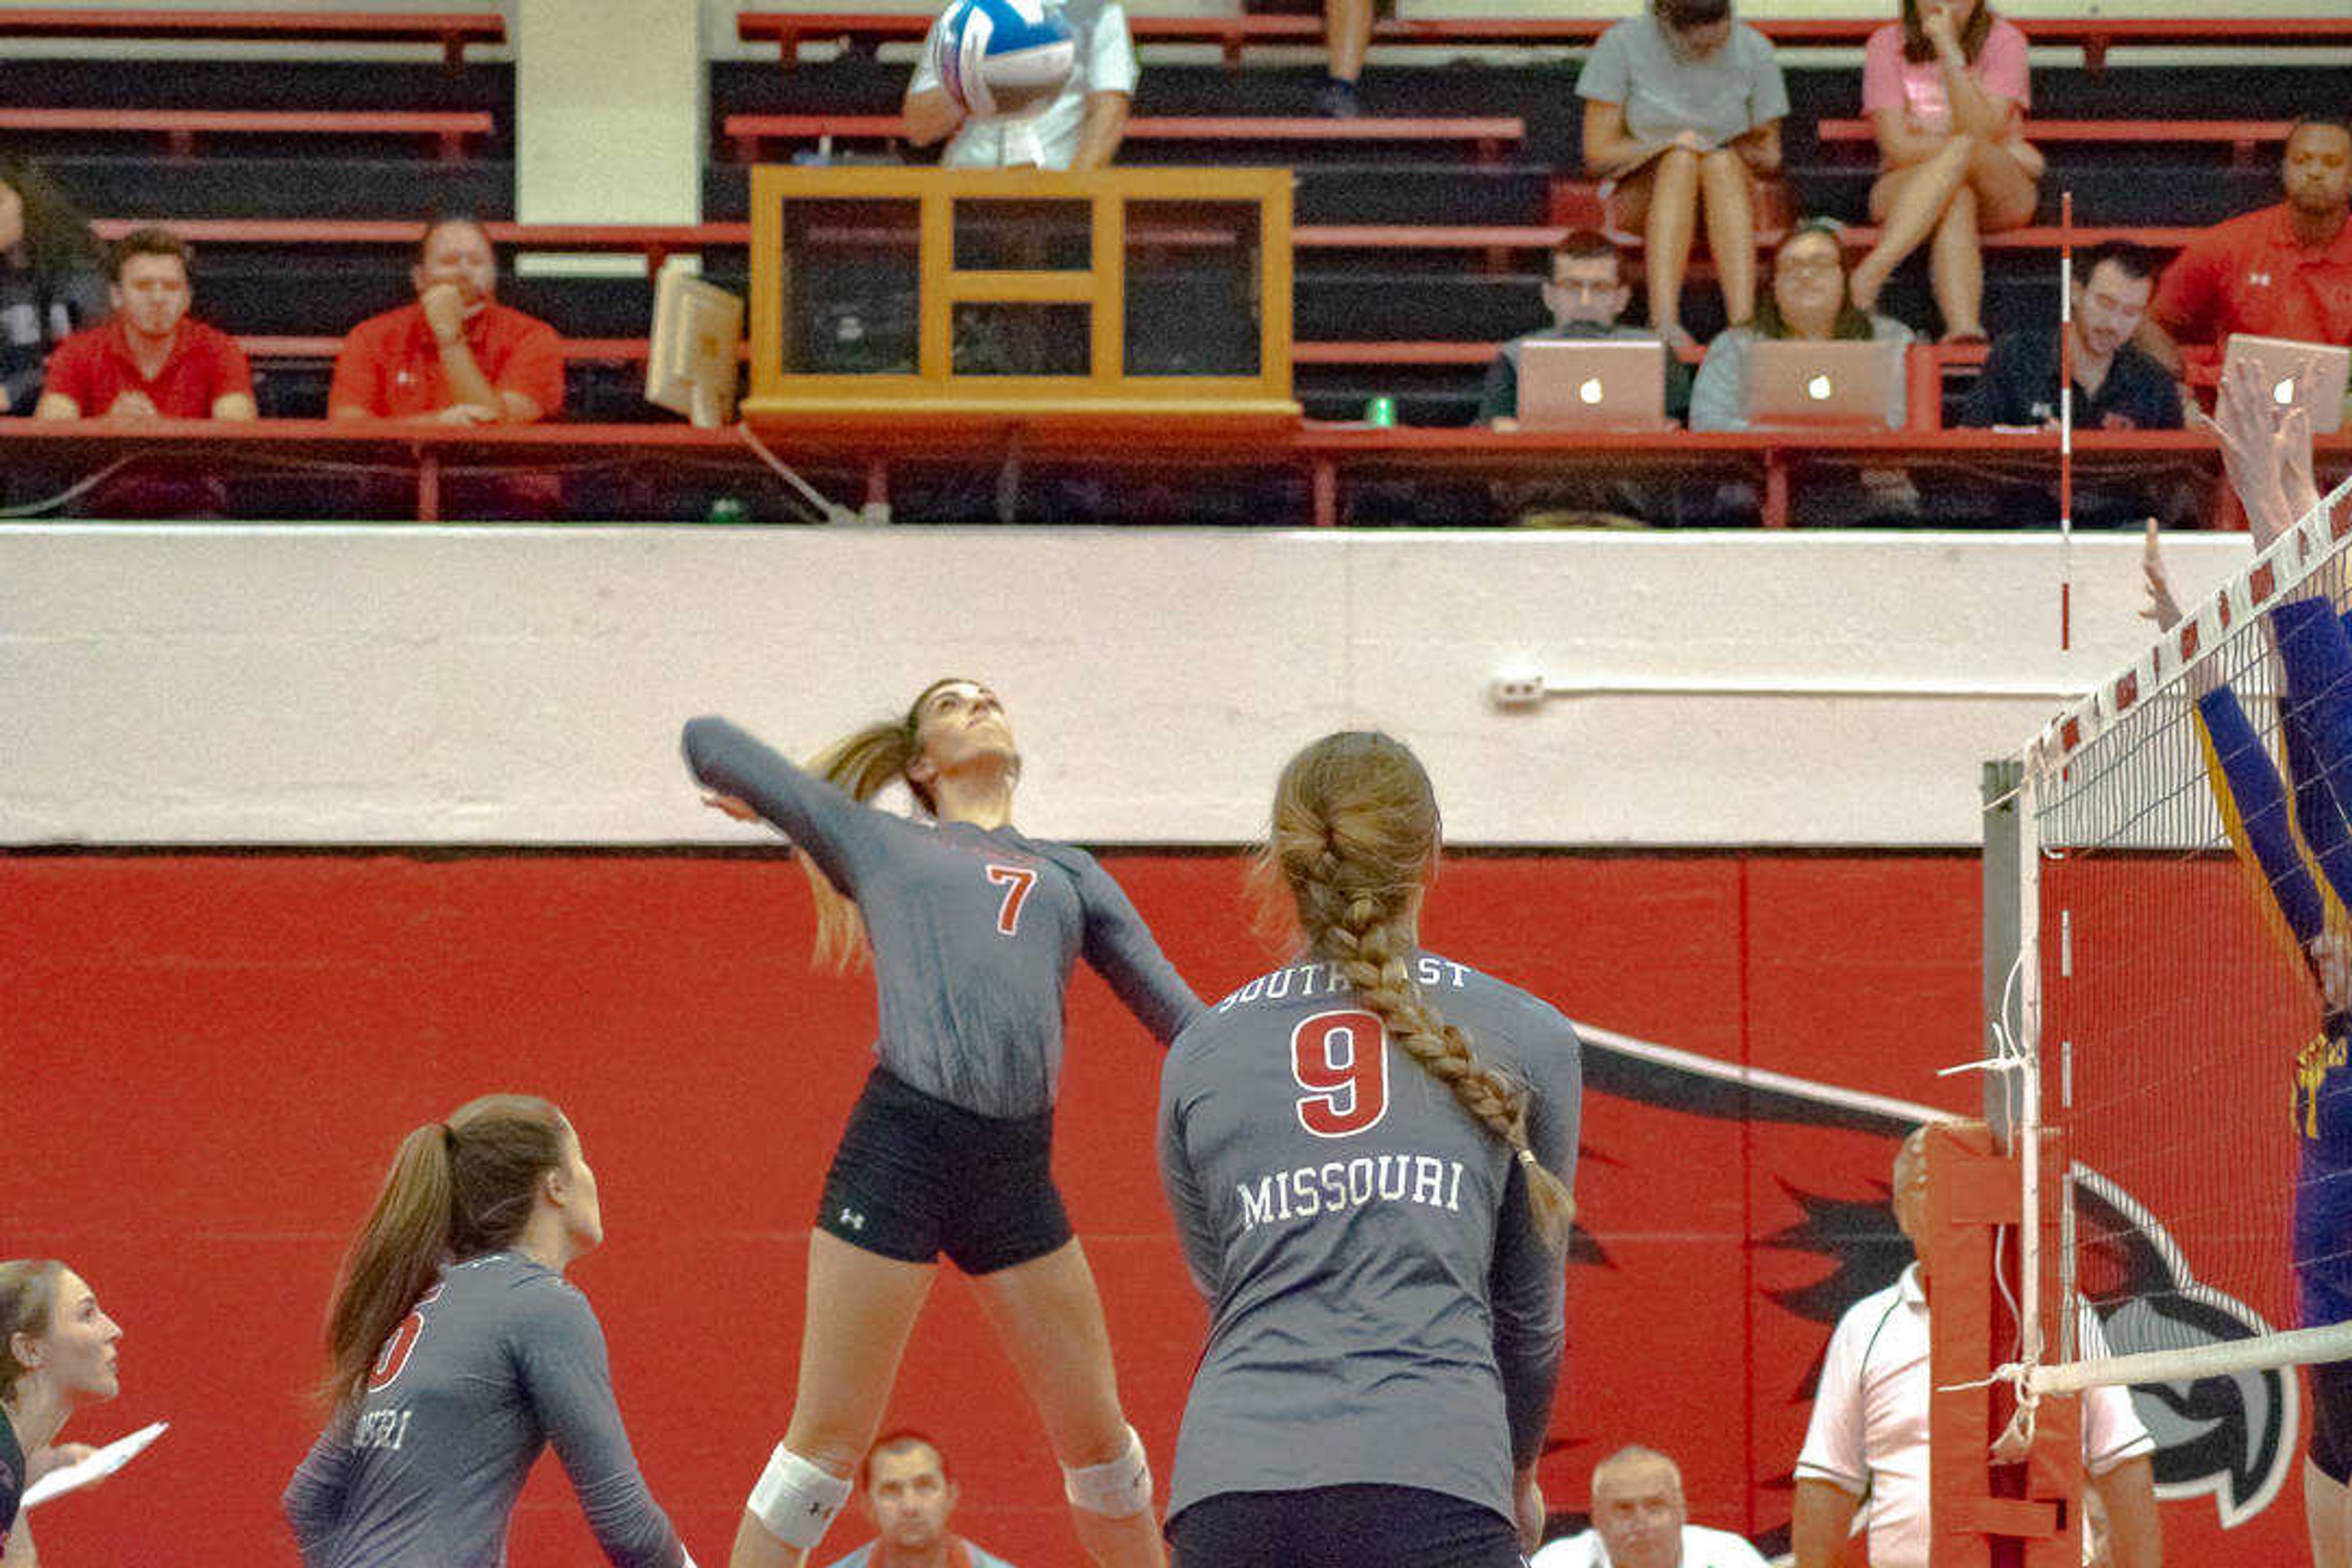 Junior outside hitter Laney Malloy spikes a ball against Western Illinois in the Redhawks Invitational on Sept. 6. Malloy was named to the All-Tournament team alongside sophomore Colby Greene.